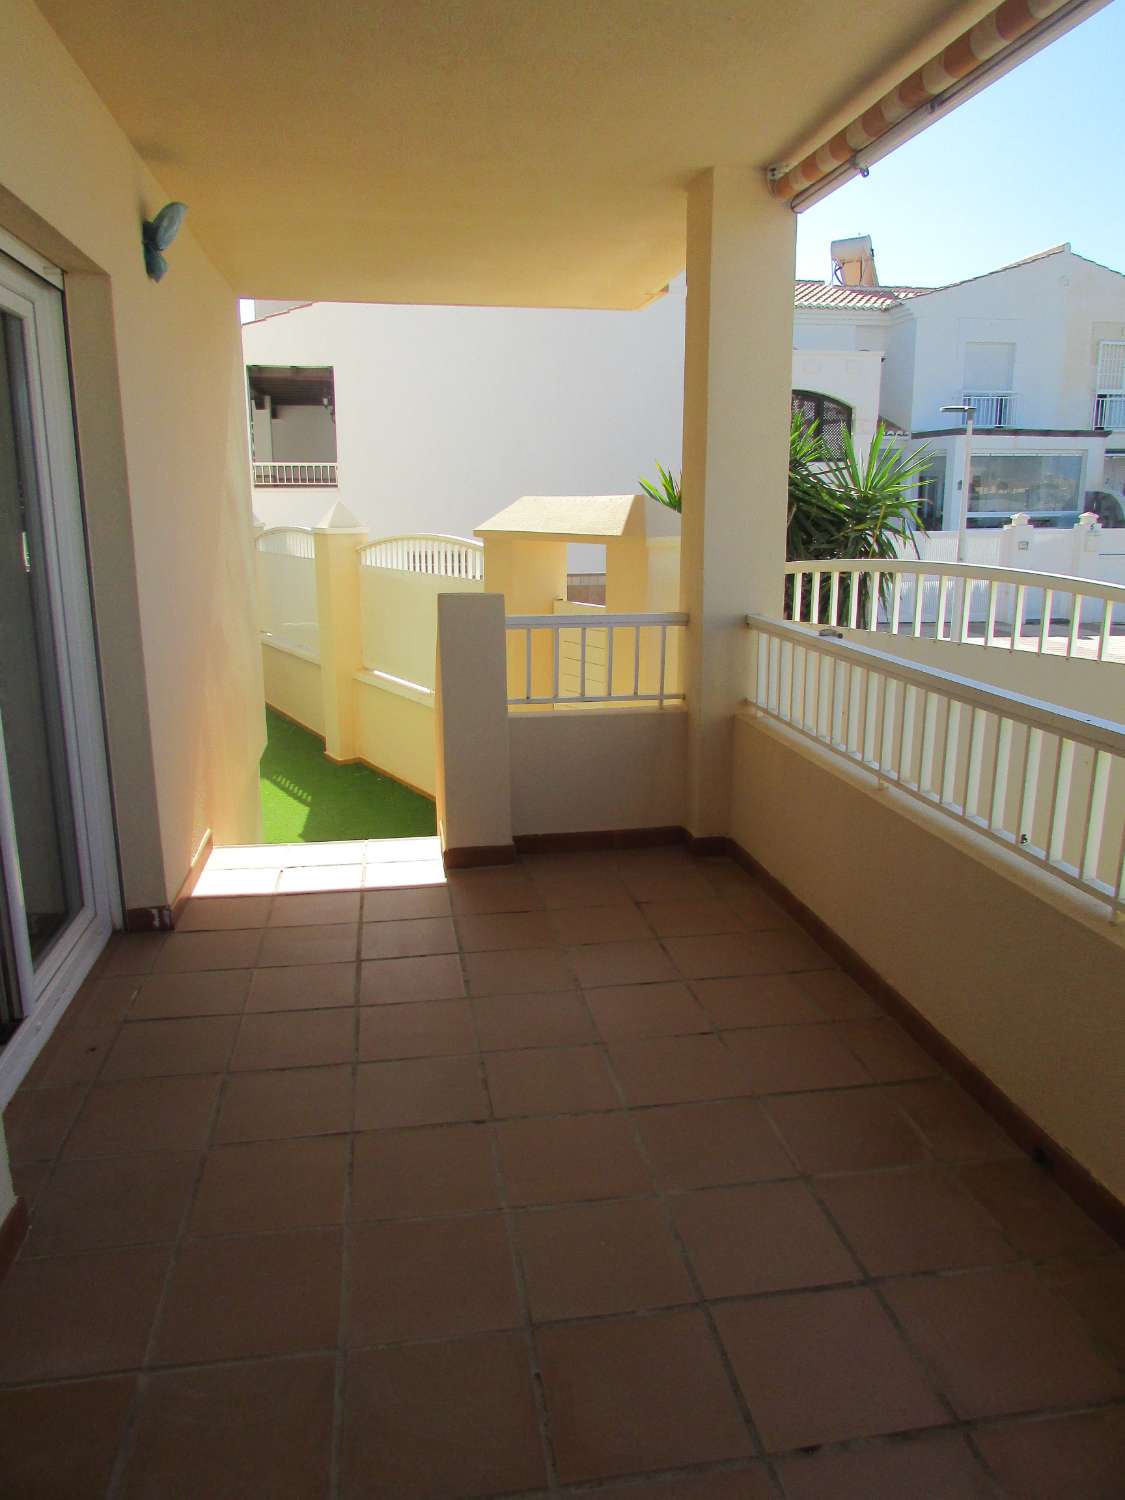 Magnificent apartment in a coastal area a few meters from the beach